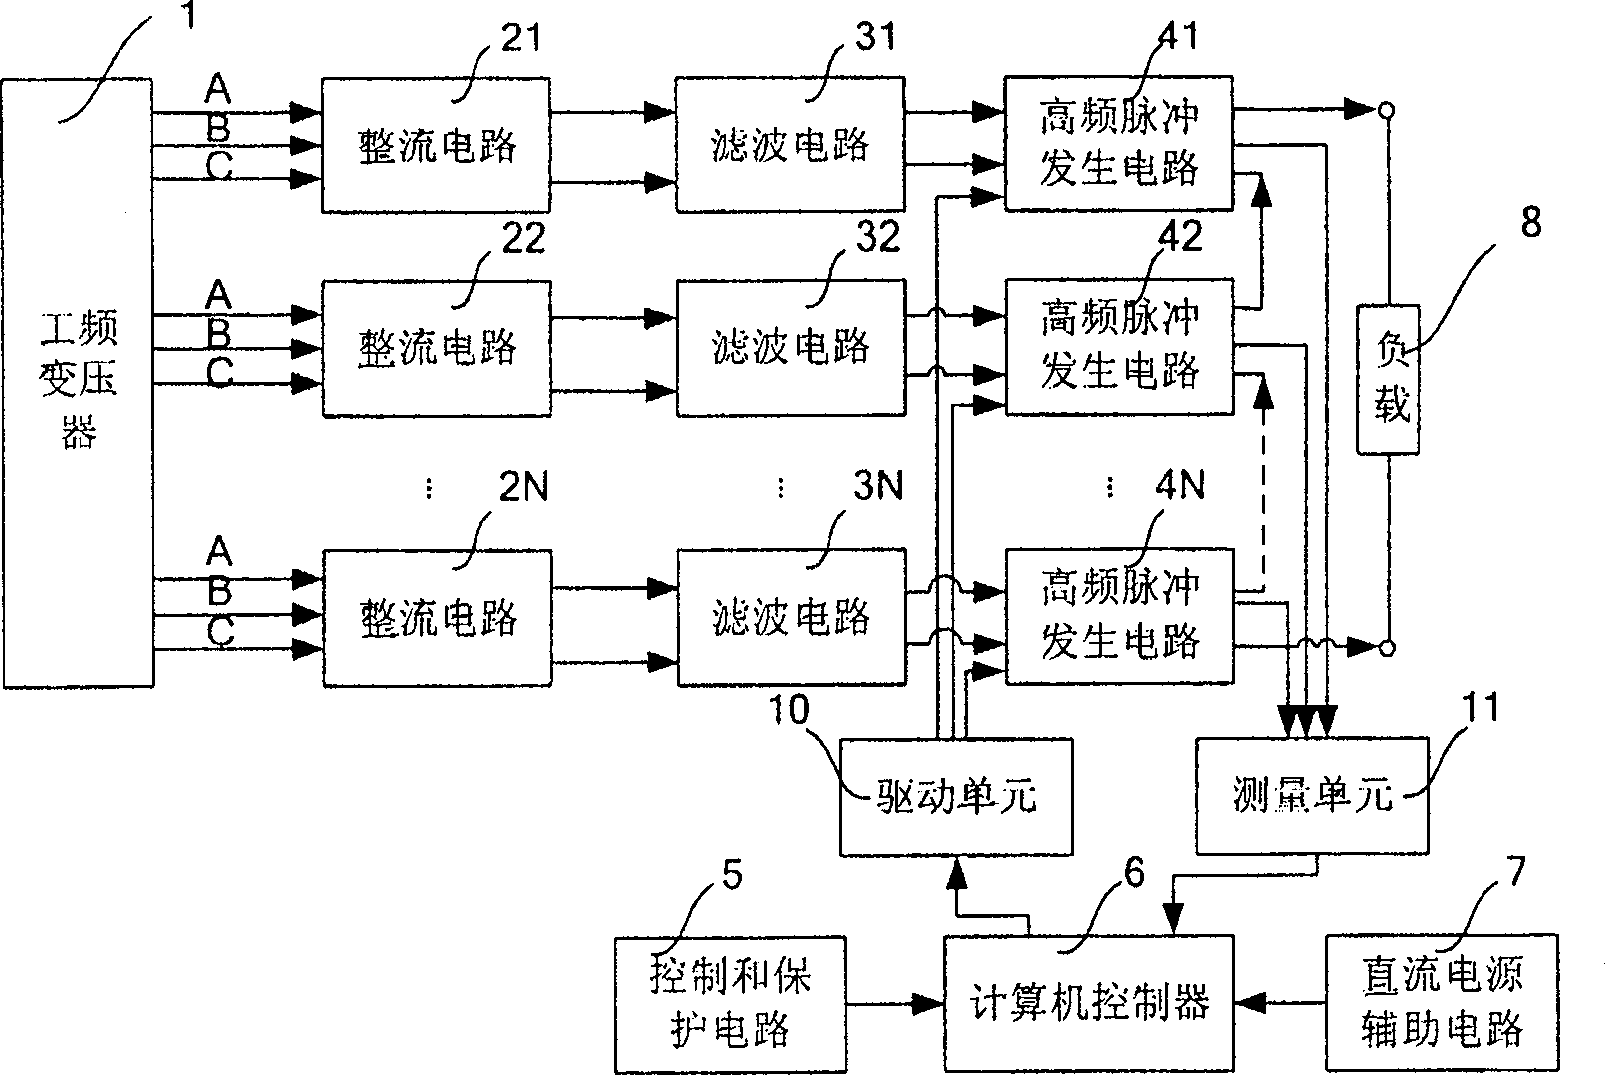 High-frequency high-voltage pulse power supply and high-frequency high-voltage pulse generation method